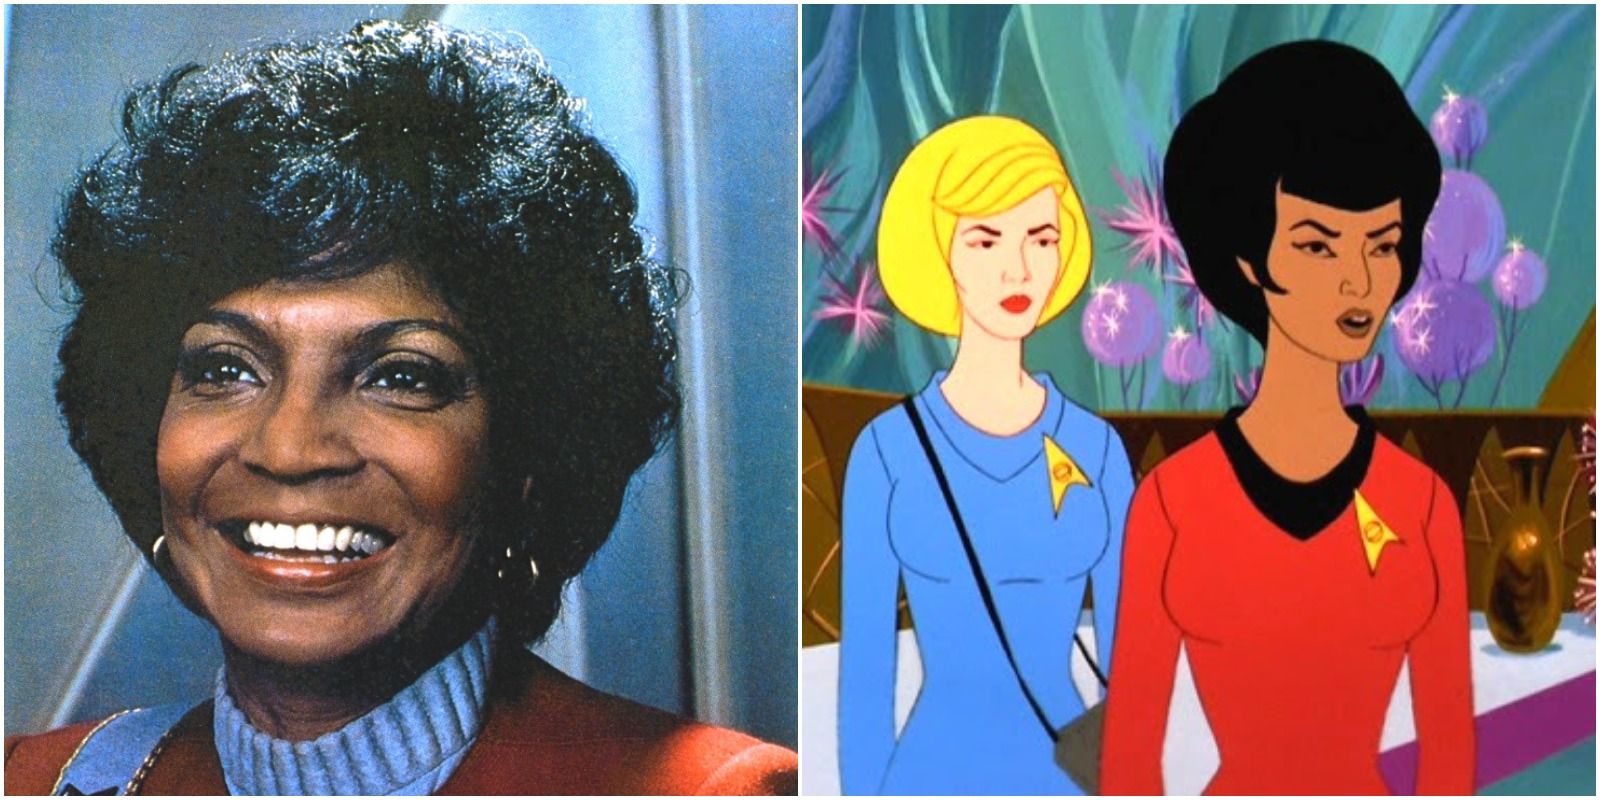 Nichelle Nichols as Uhura in the TOS films and animated show